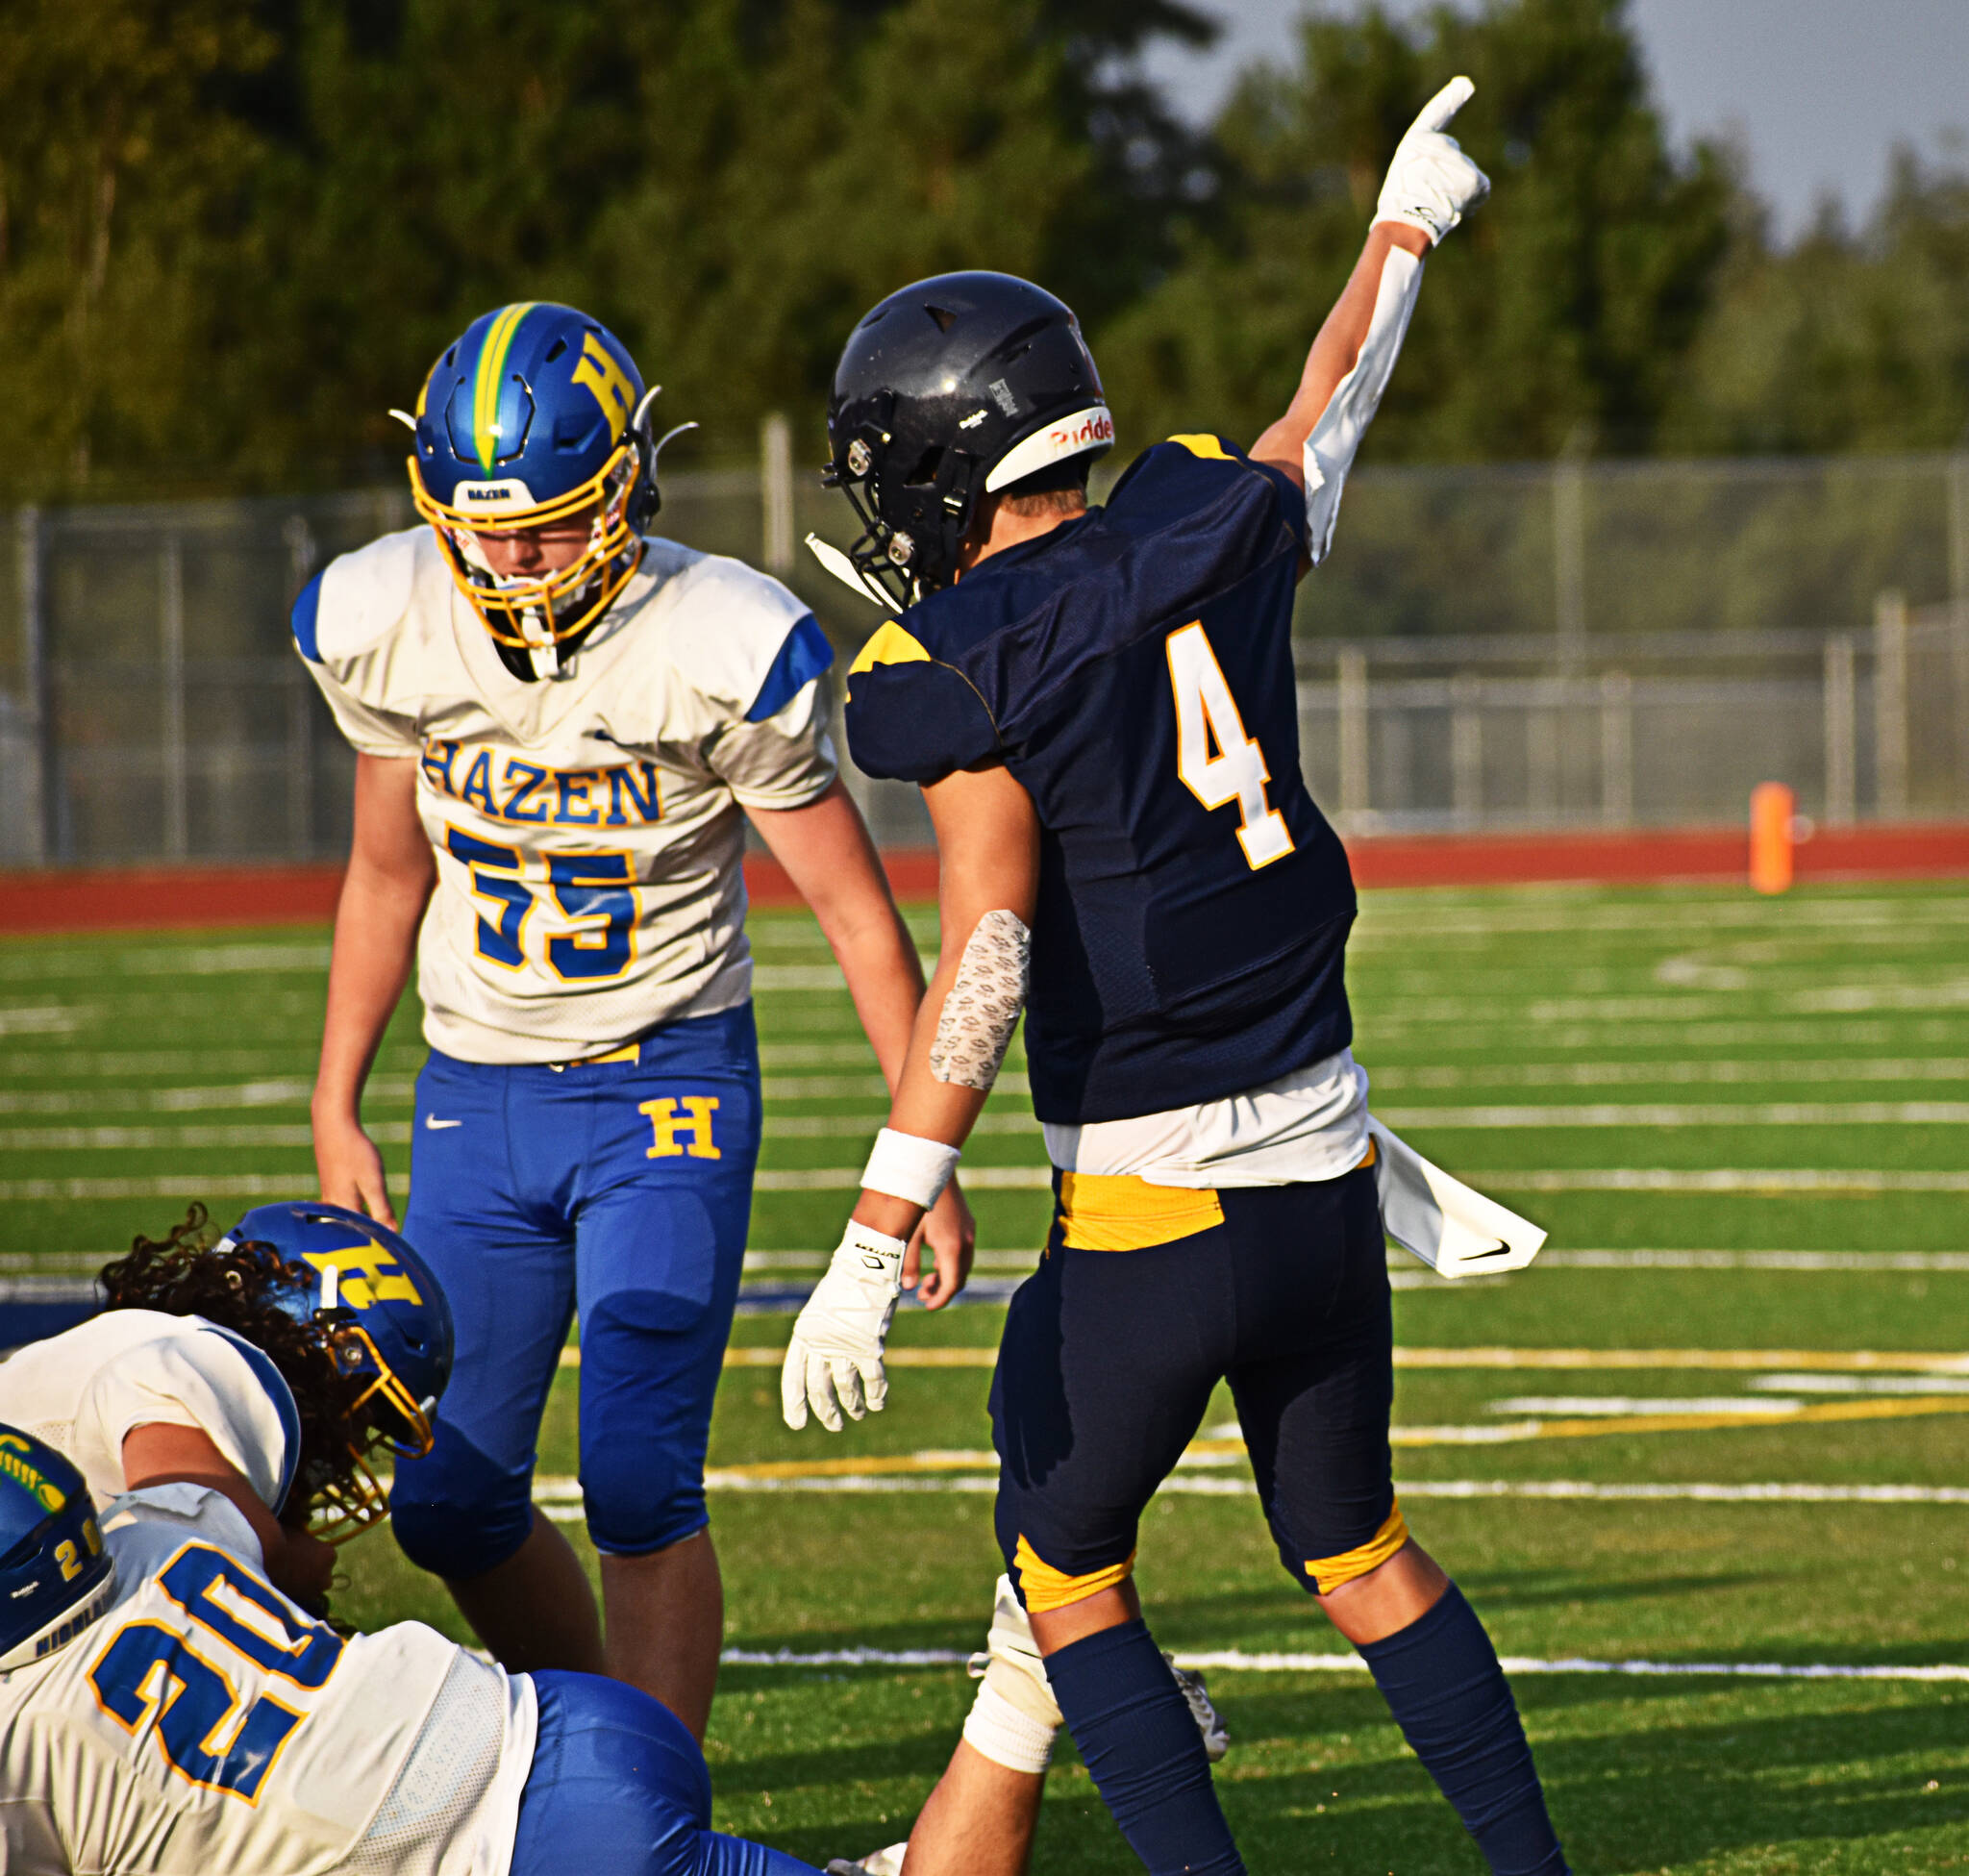 The Bainbridge Spartans are looking to upset the Bremerton Knights at home Oct. 20. File Photo